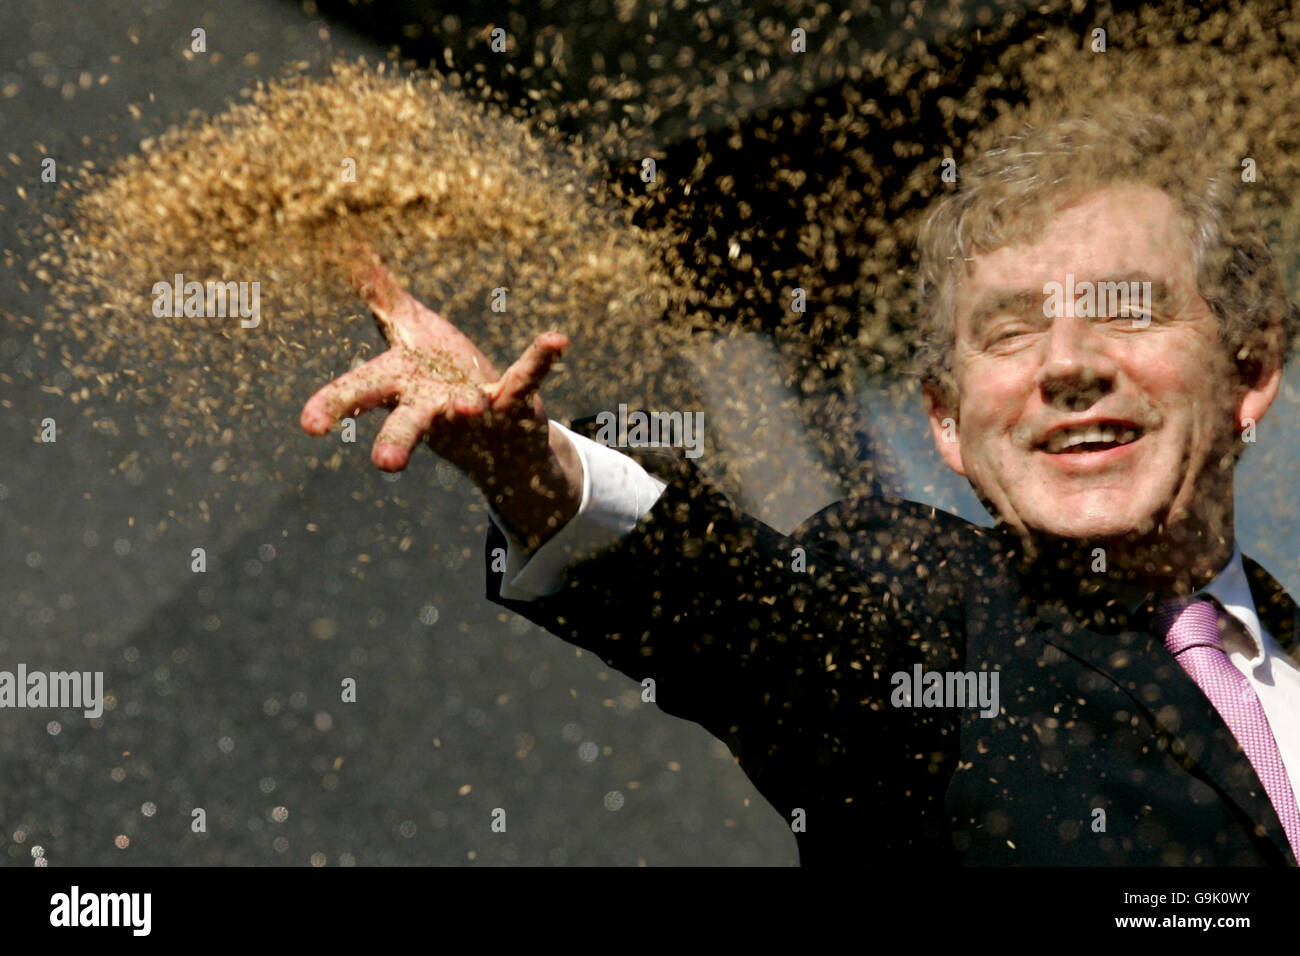 Chancellor Gordon Brown official opens the fifth Maggie's Cancer Caring Centre at Victoria Hospital in Kirkcaldy, by throwing seeds to the ground in the garden. Stock Photo